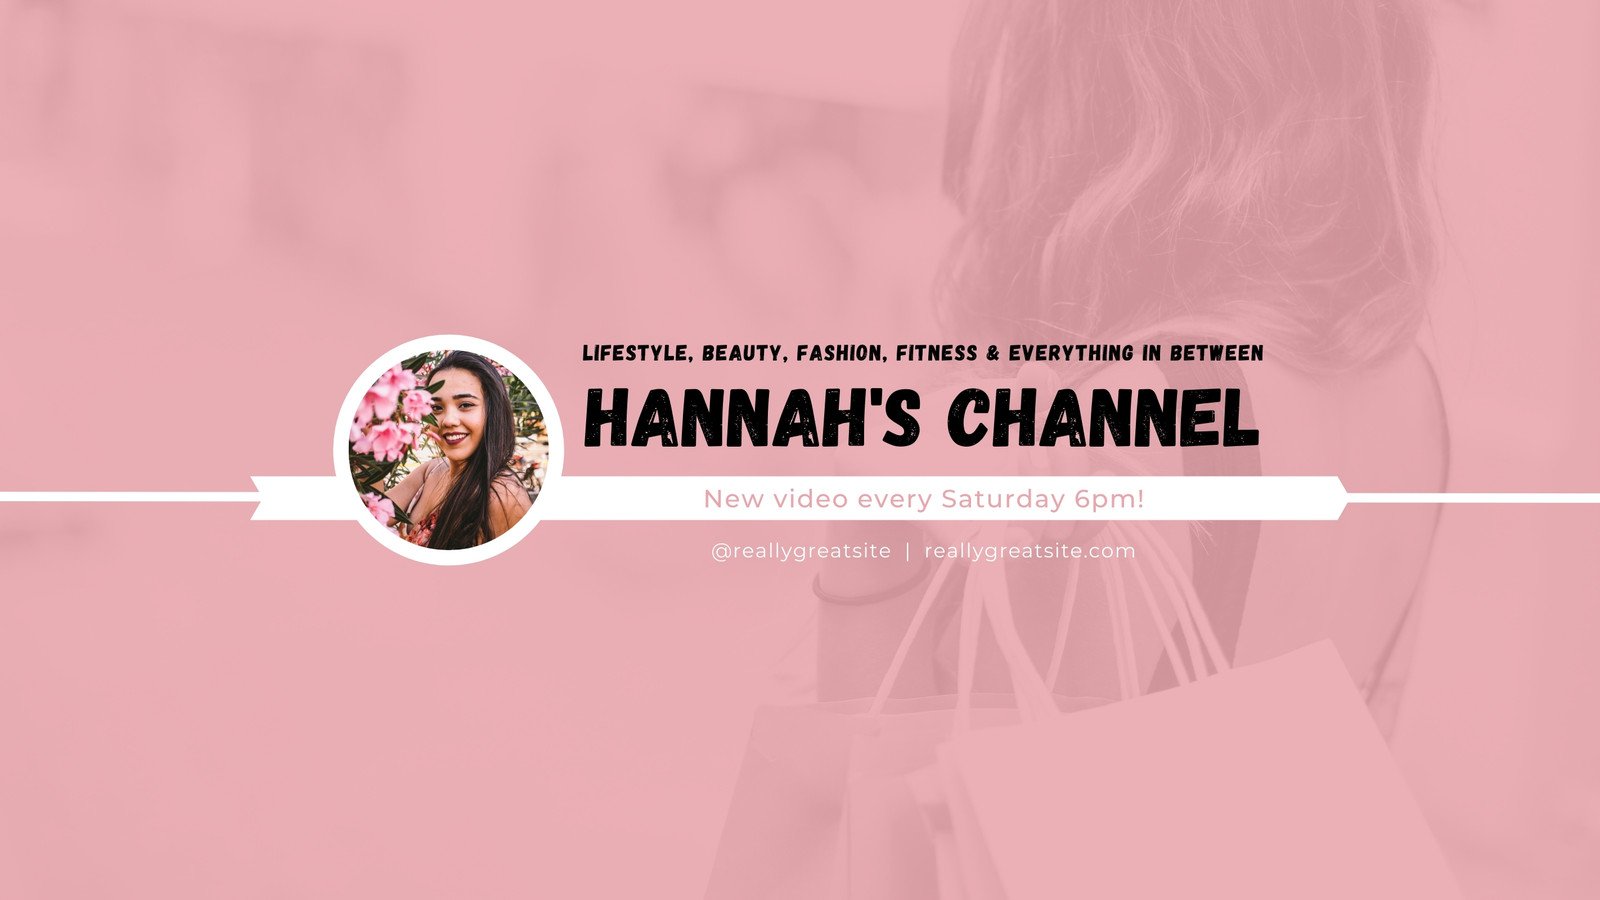 Free and customizable YouTube channel art templates | Canva